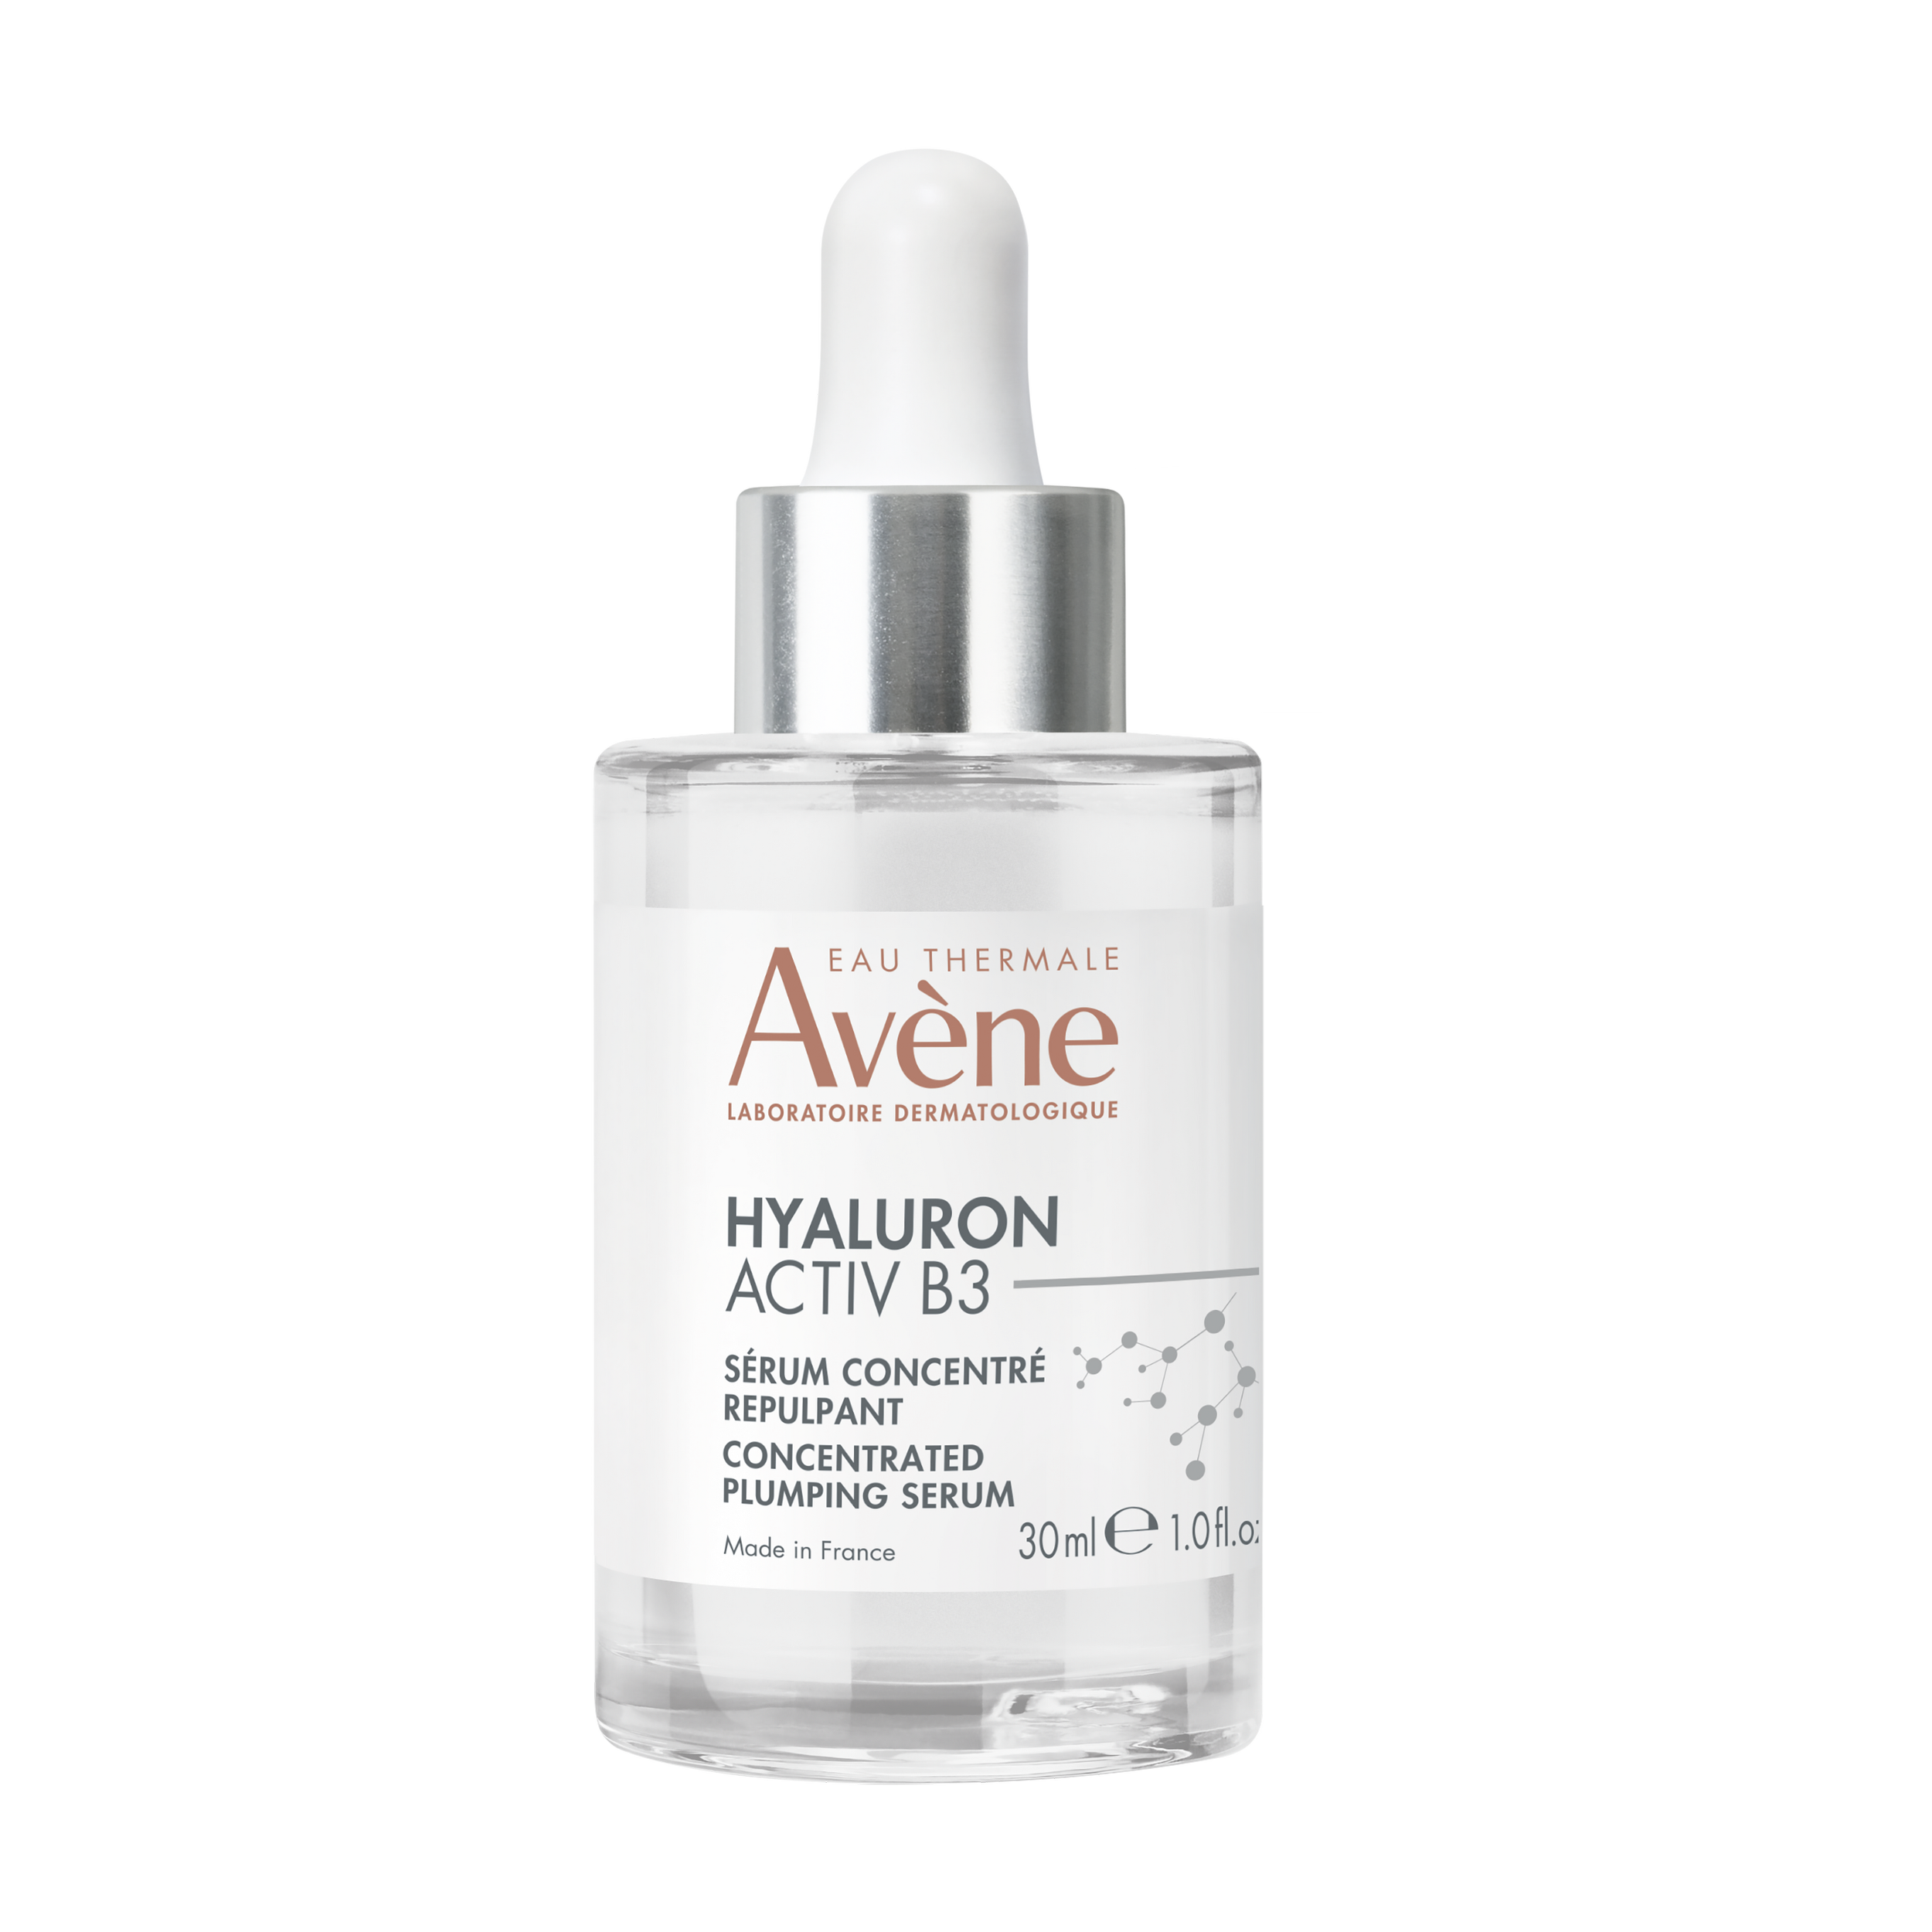 Avène Hyaluron Activ B3 Concentrated Plumping SerumSerum